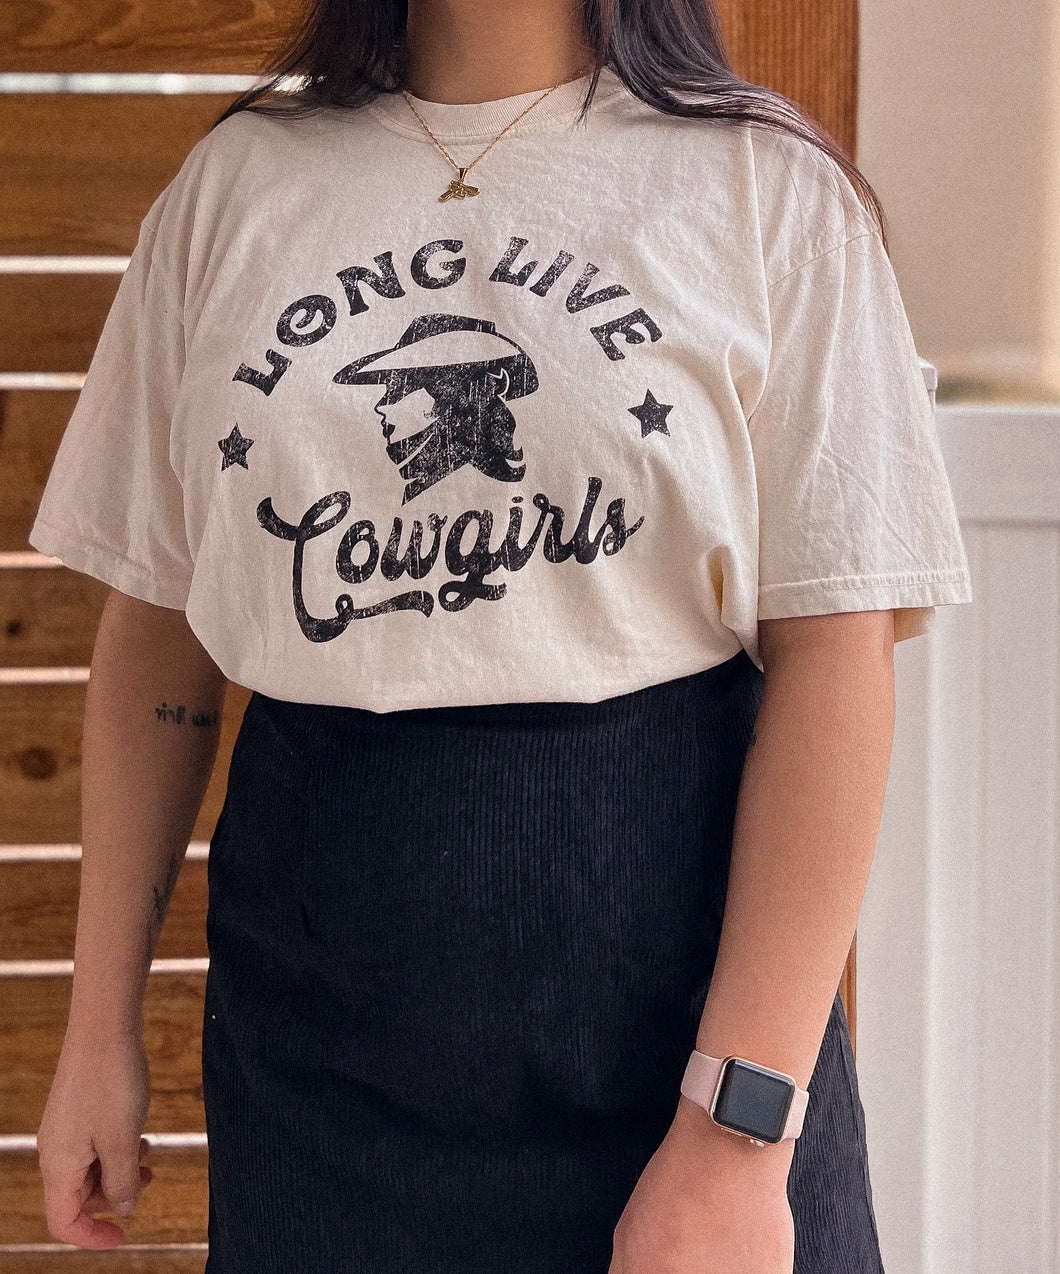 long live cowgirls graphic tee